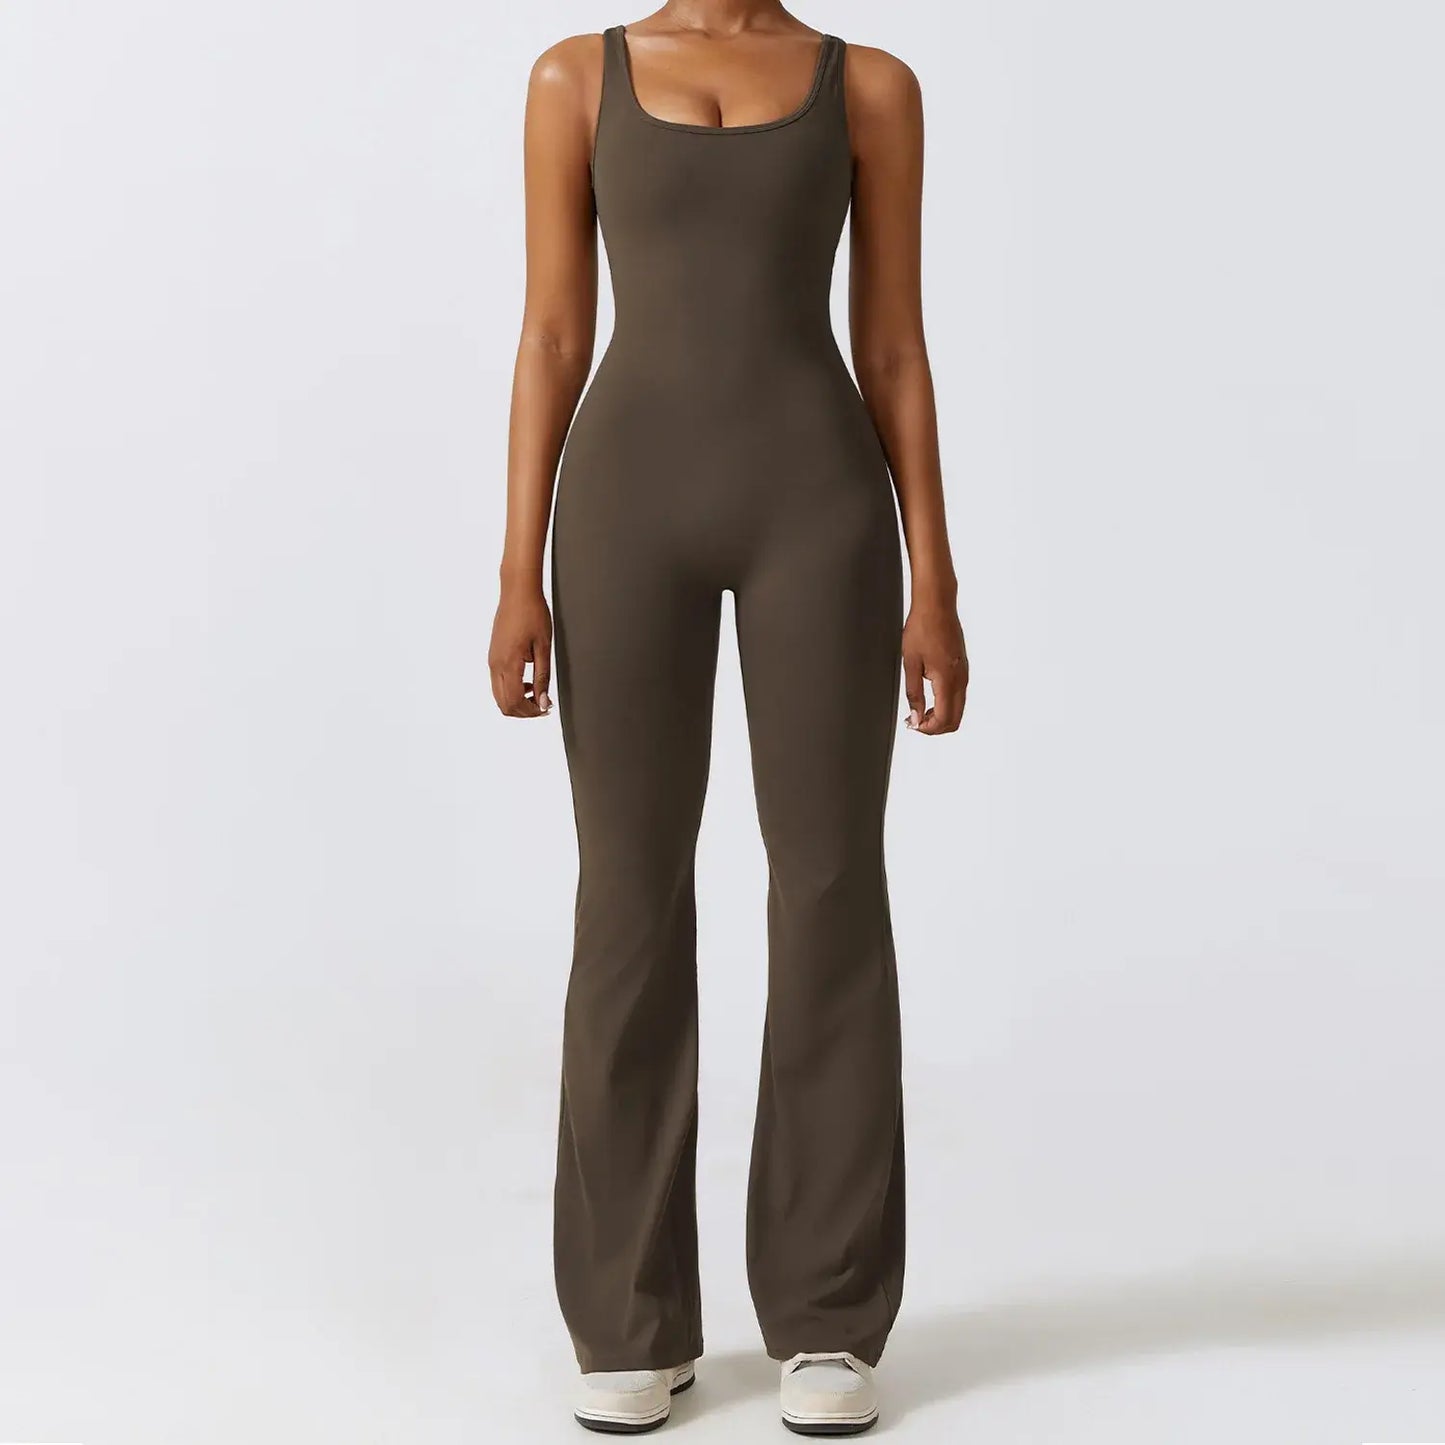 Sexy Push Up Flare Jumpsuit